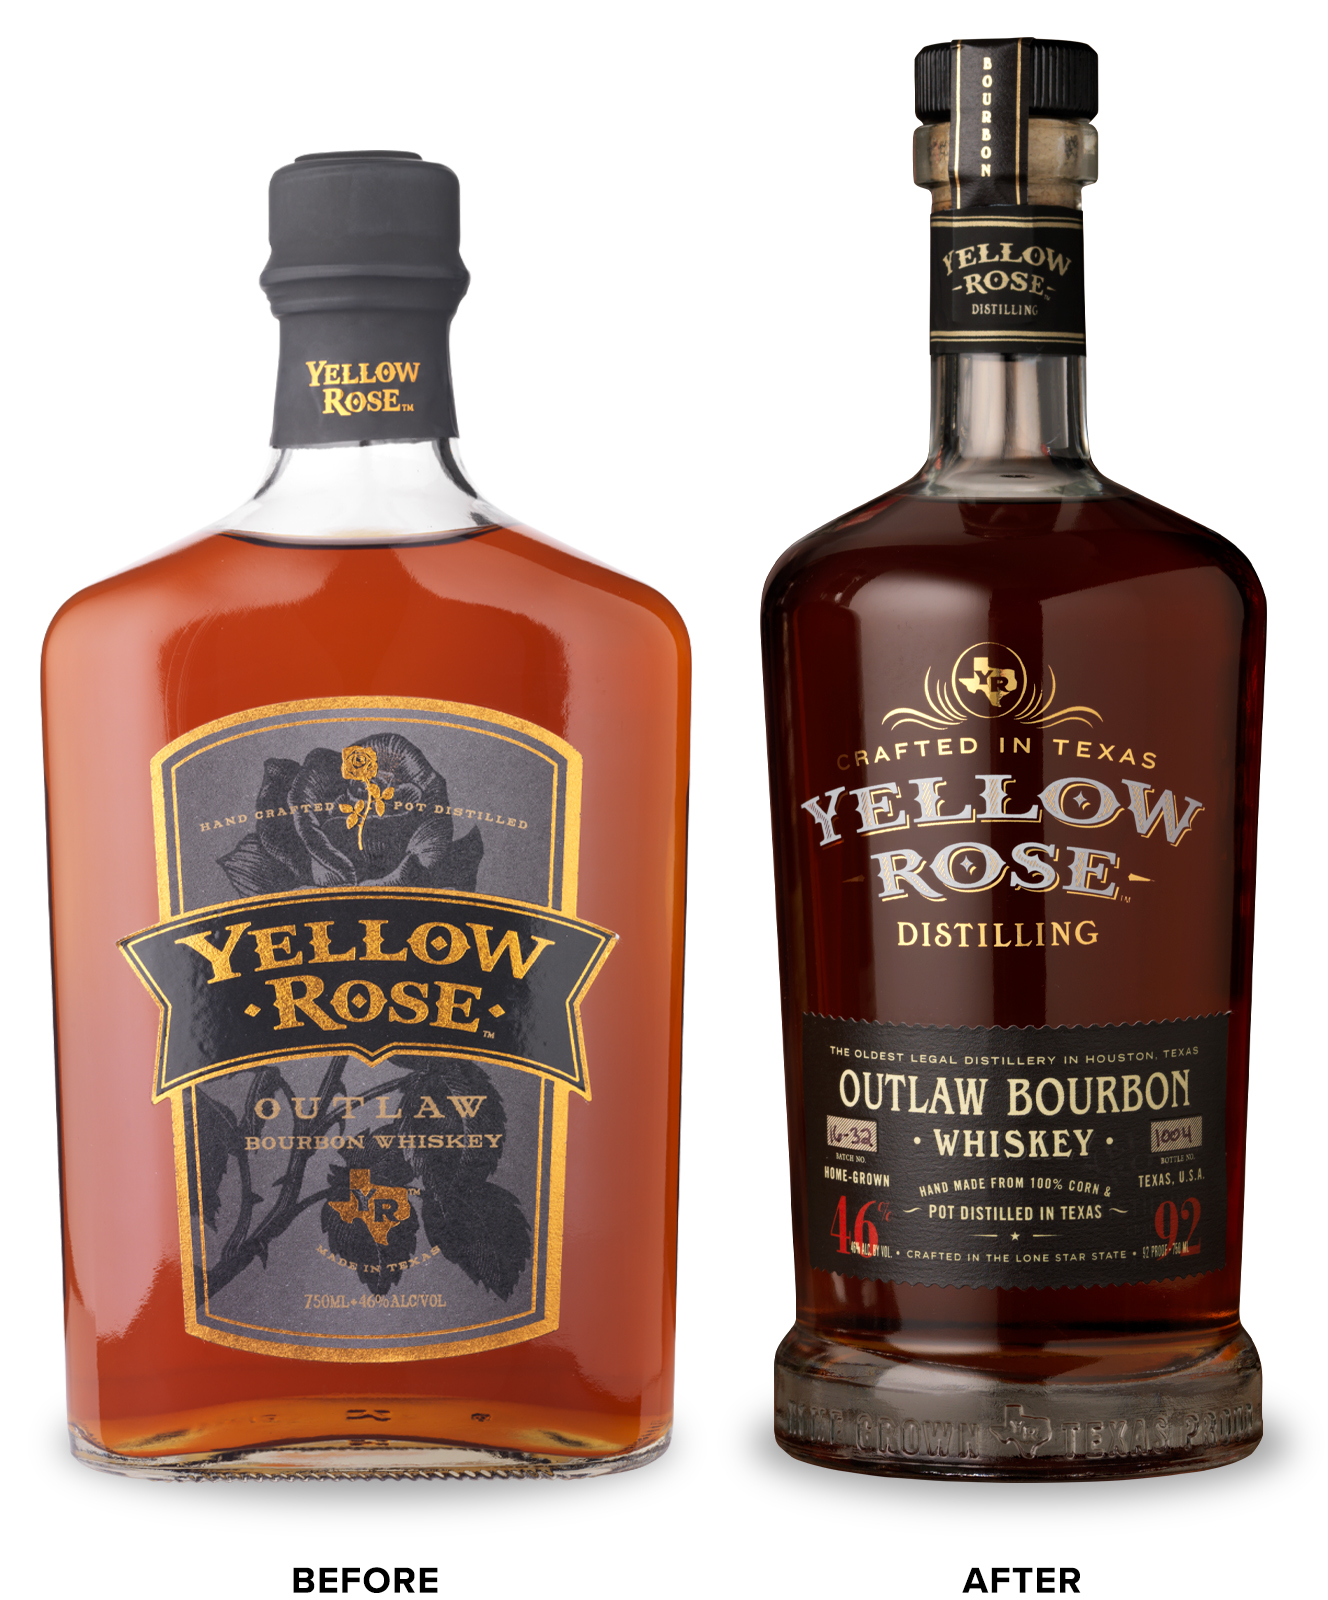 Yellow Rose Distilling Whiskey Packaging Before Redesign on Left & After on Right